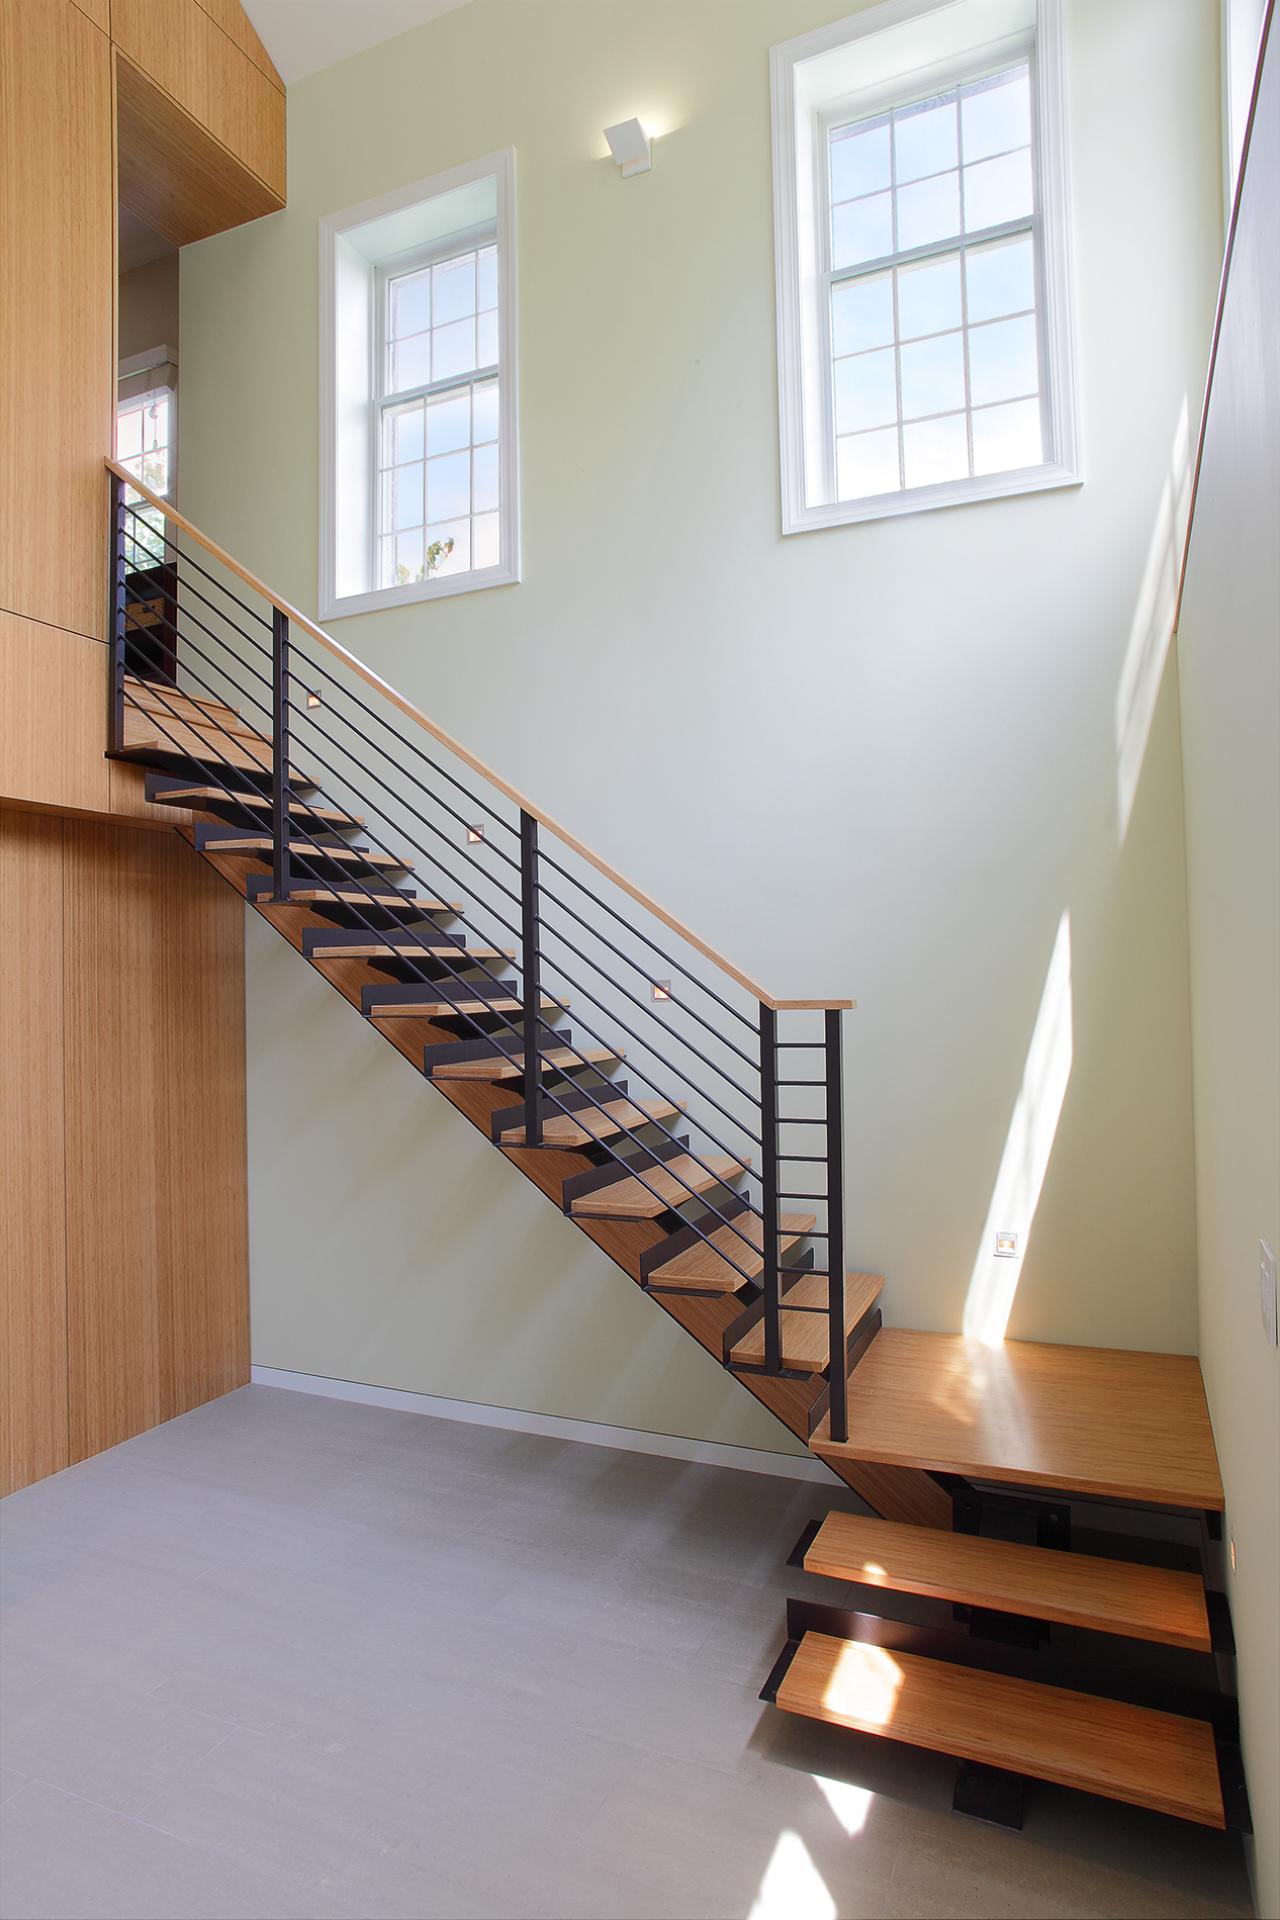 Contemporary Staircase With Landing | HGTV